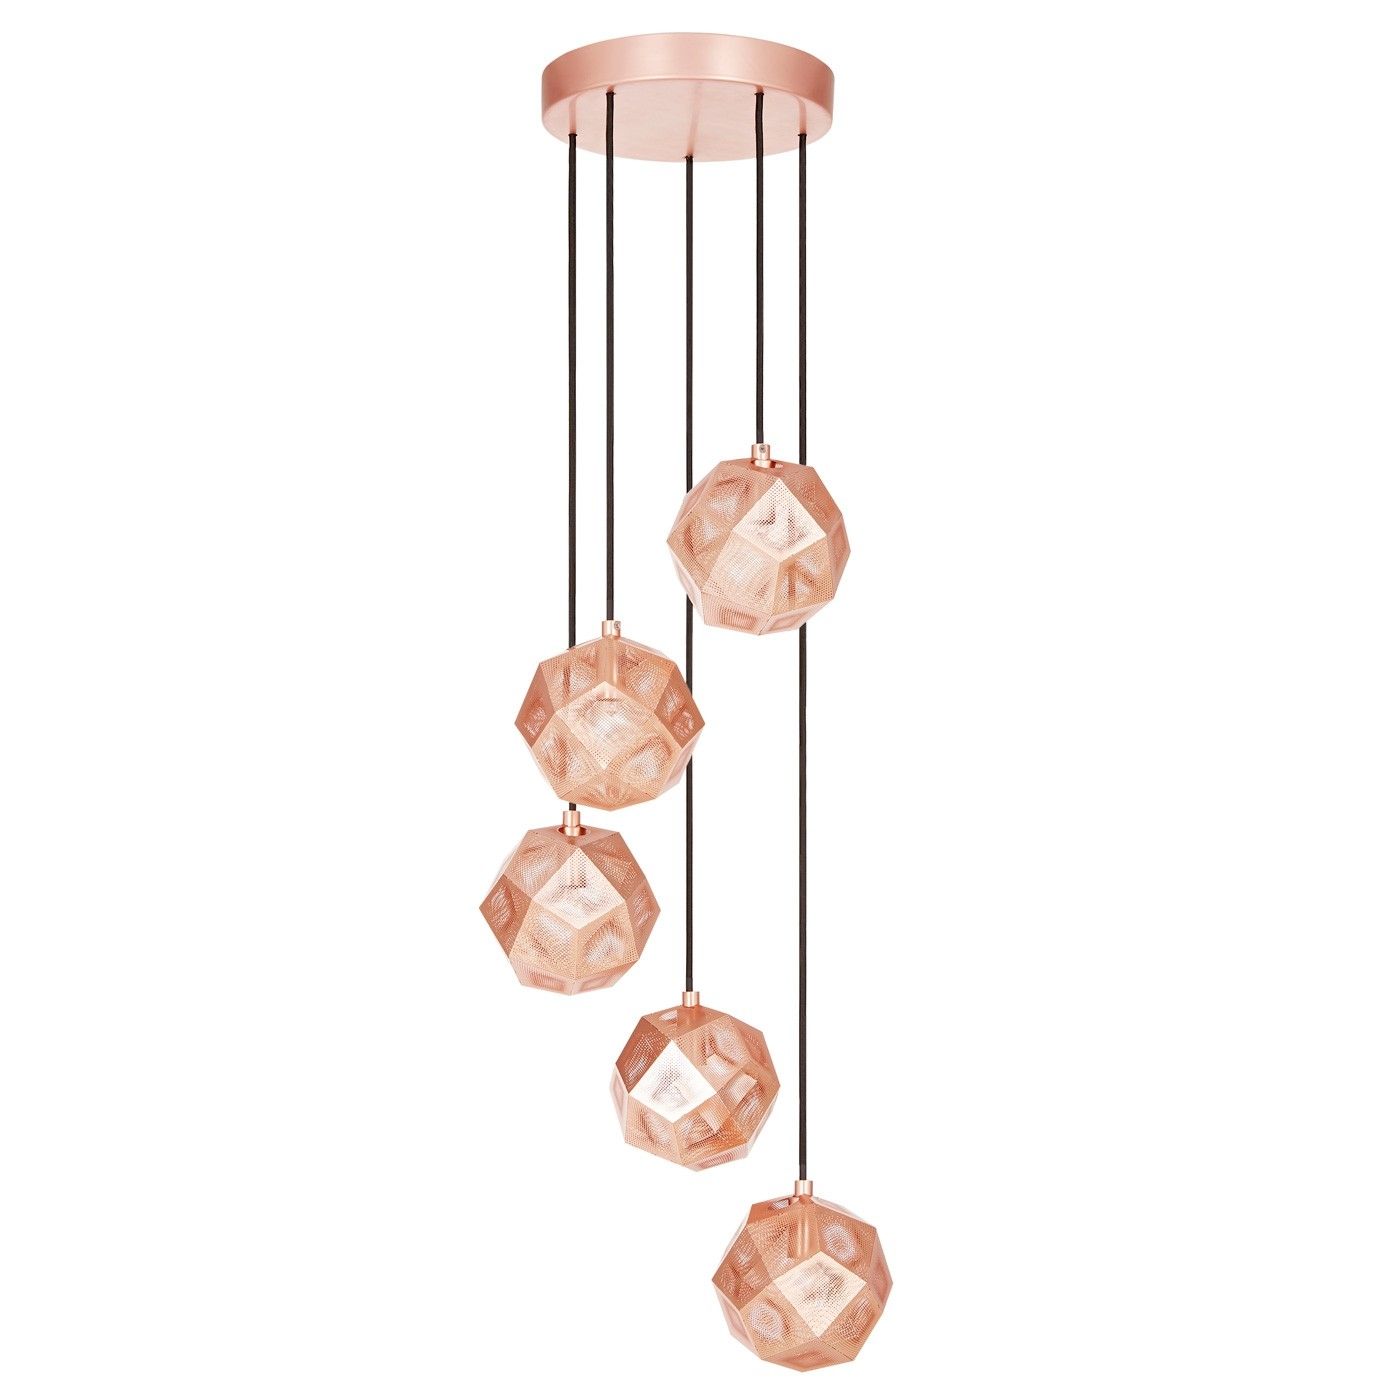 Etch Mini Chandelier Copper Within Copper Chandelier (View 1 of 15)